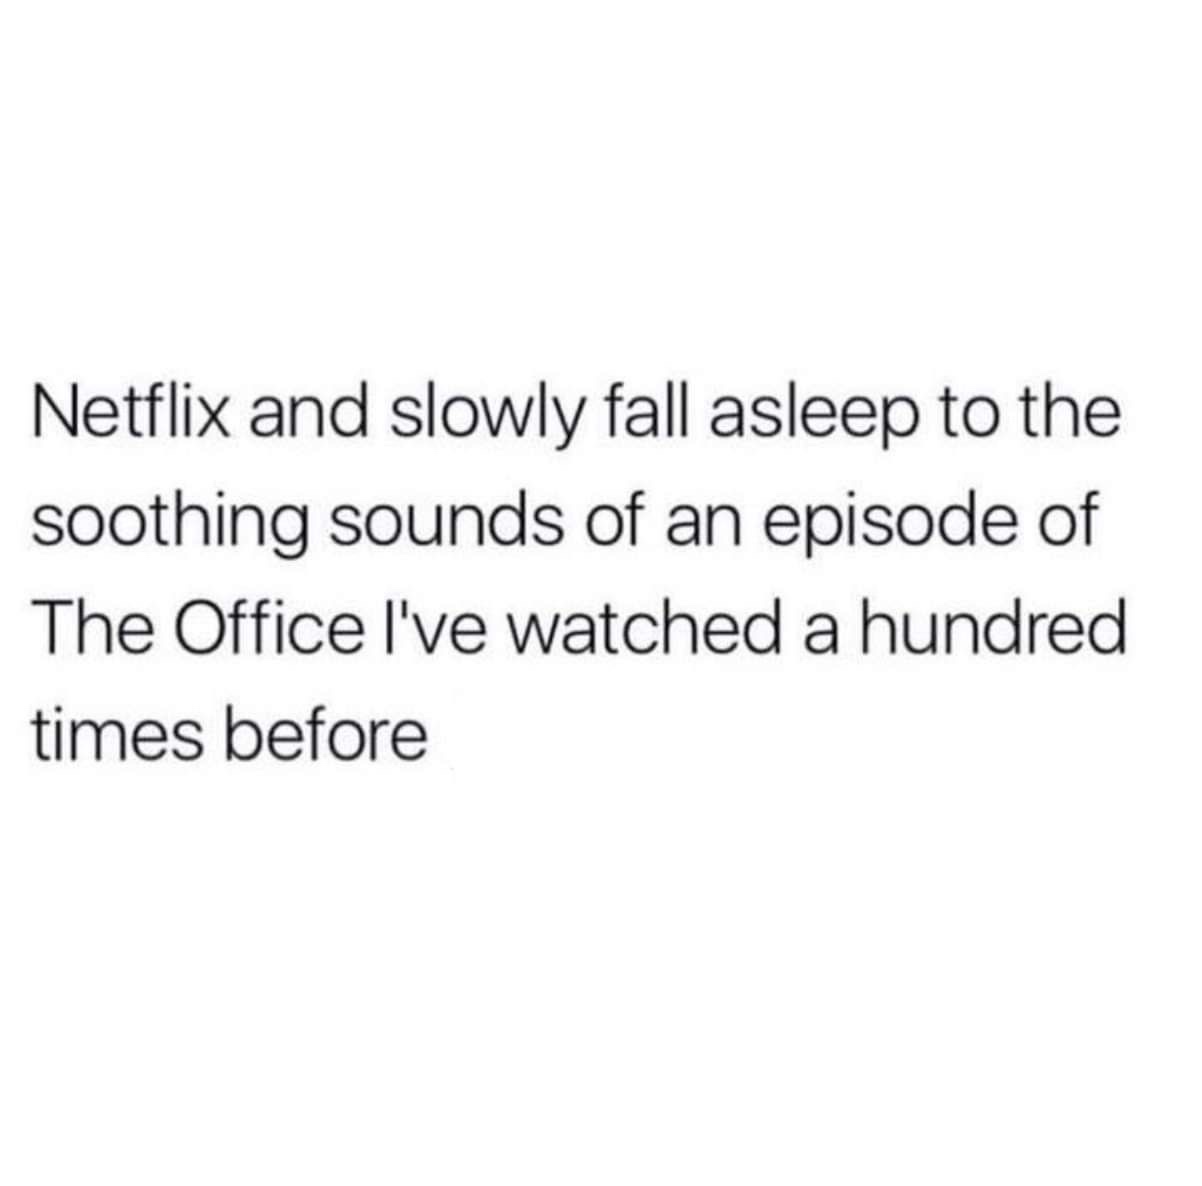 self love quotes for girl - Netflix and slowly fall asleep to the soothing sounds of an episode of The Office I've watched a hundred times before